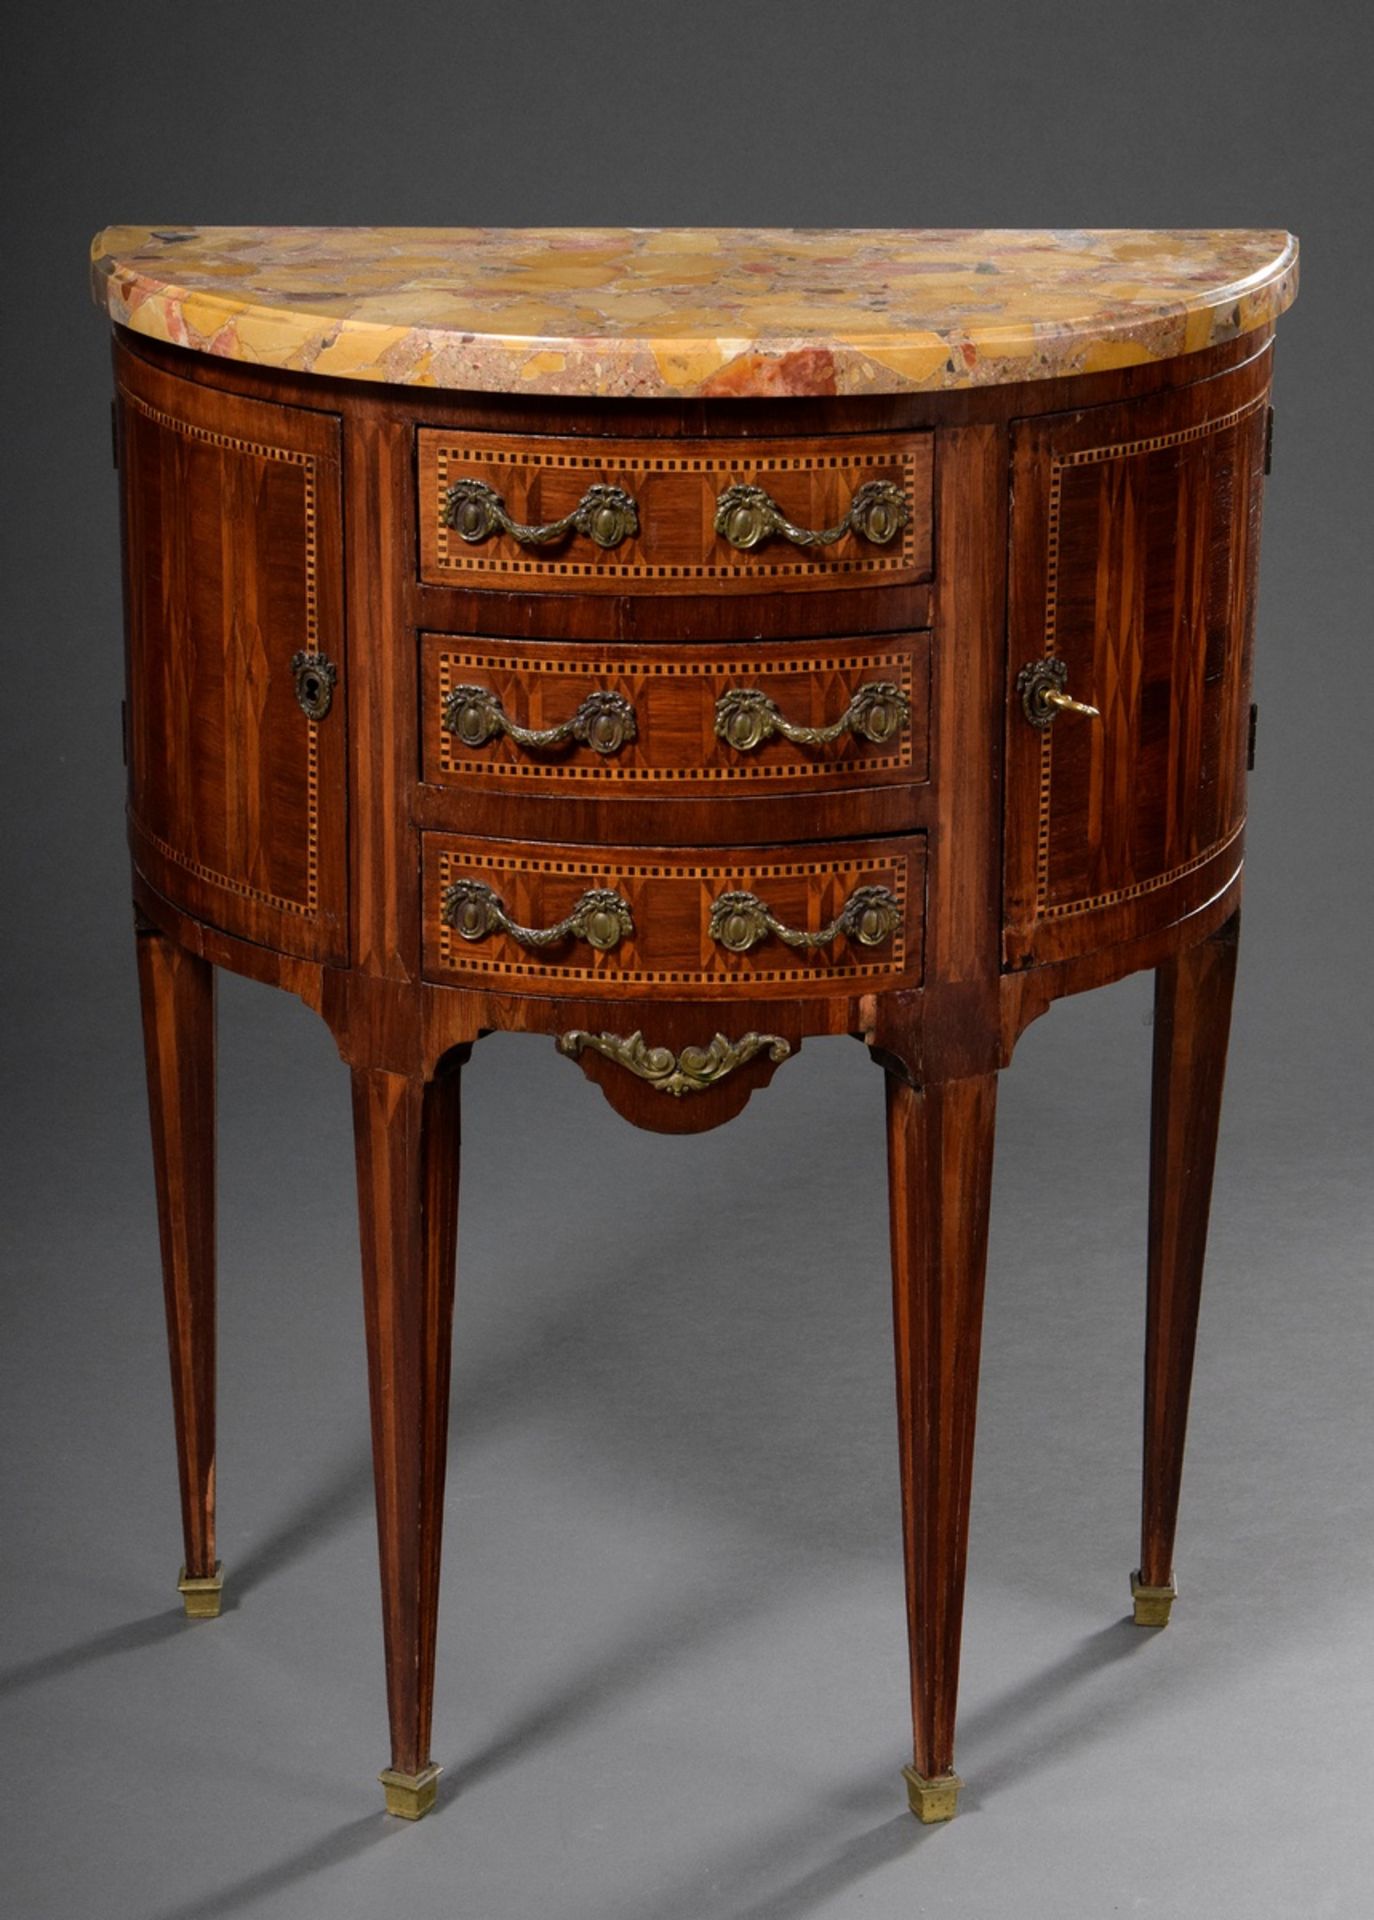 Dainty demi lune console chest with geometric marquetry and marble top in Louis XVI style, end of 1